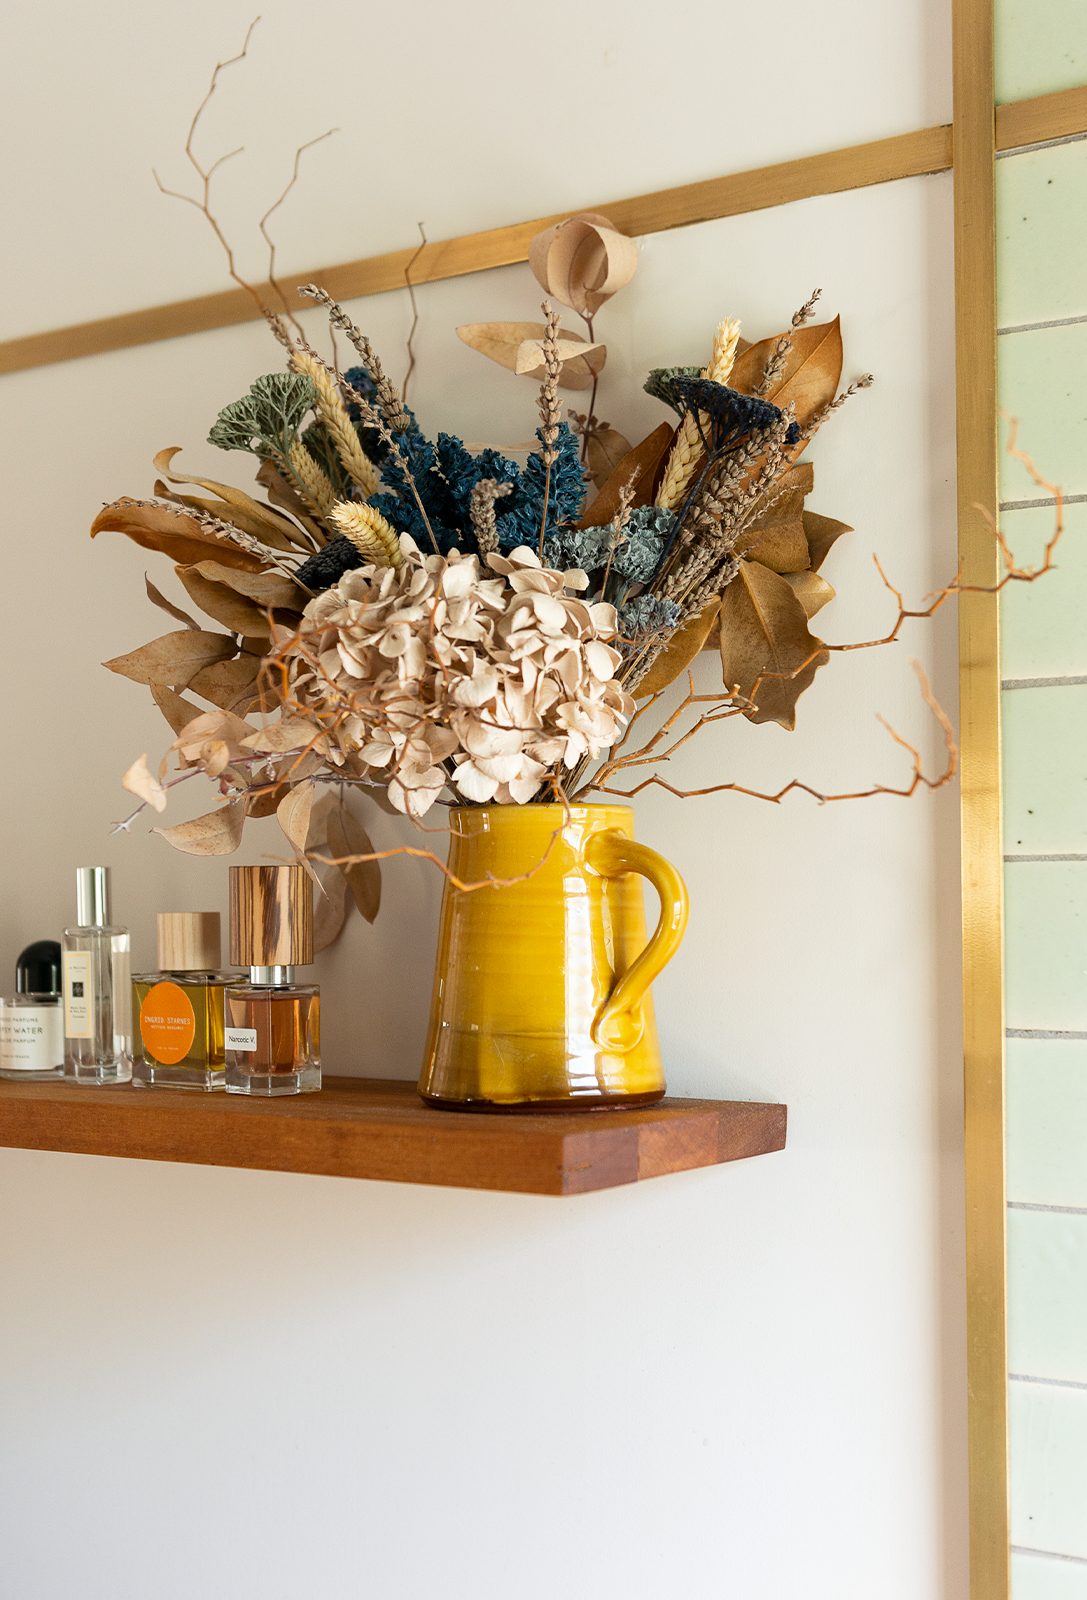 Mustard yellow vase containing dried flowers on brown shelf